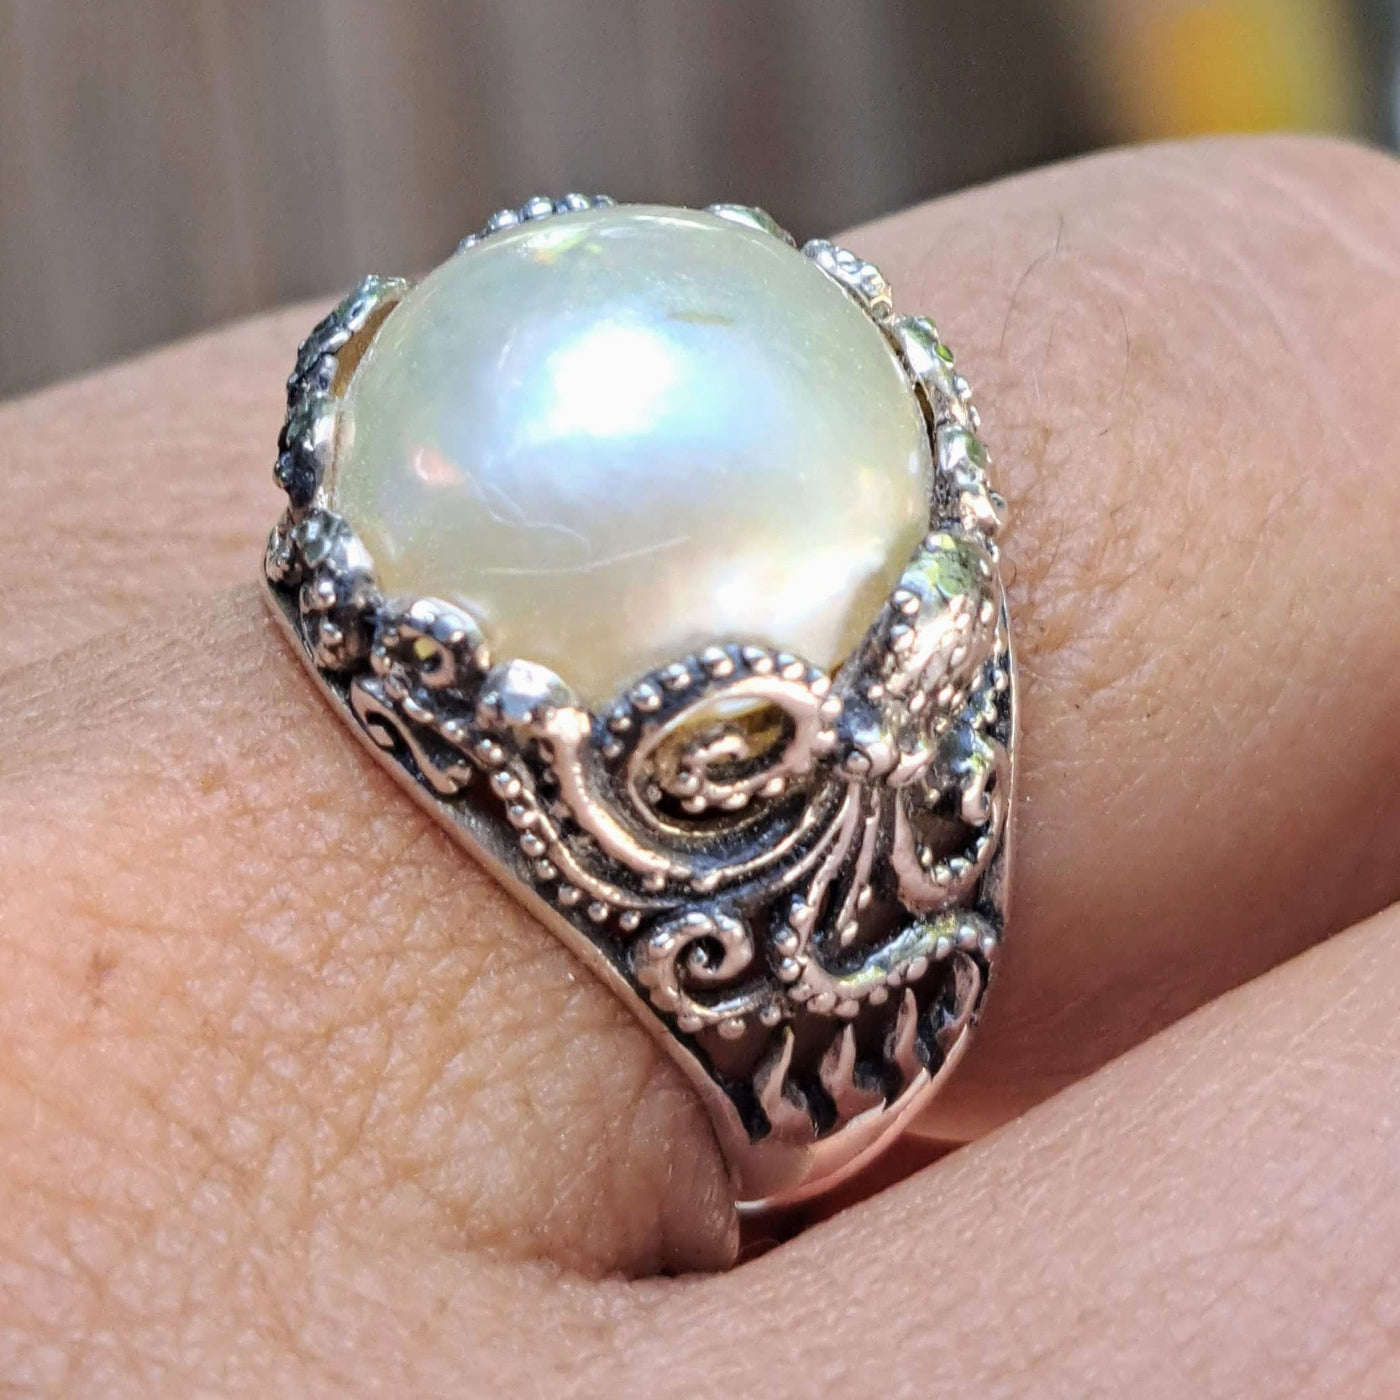 "My Octopus Pearl" Size 8 Ring - Mabé Pearl, Sterling